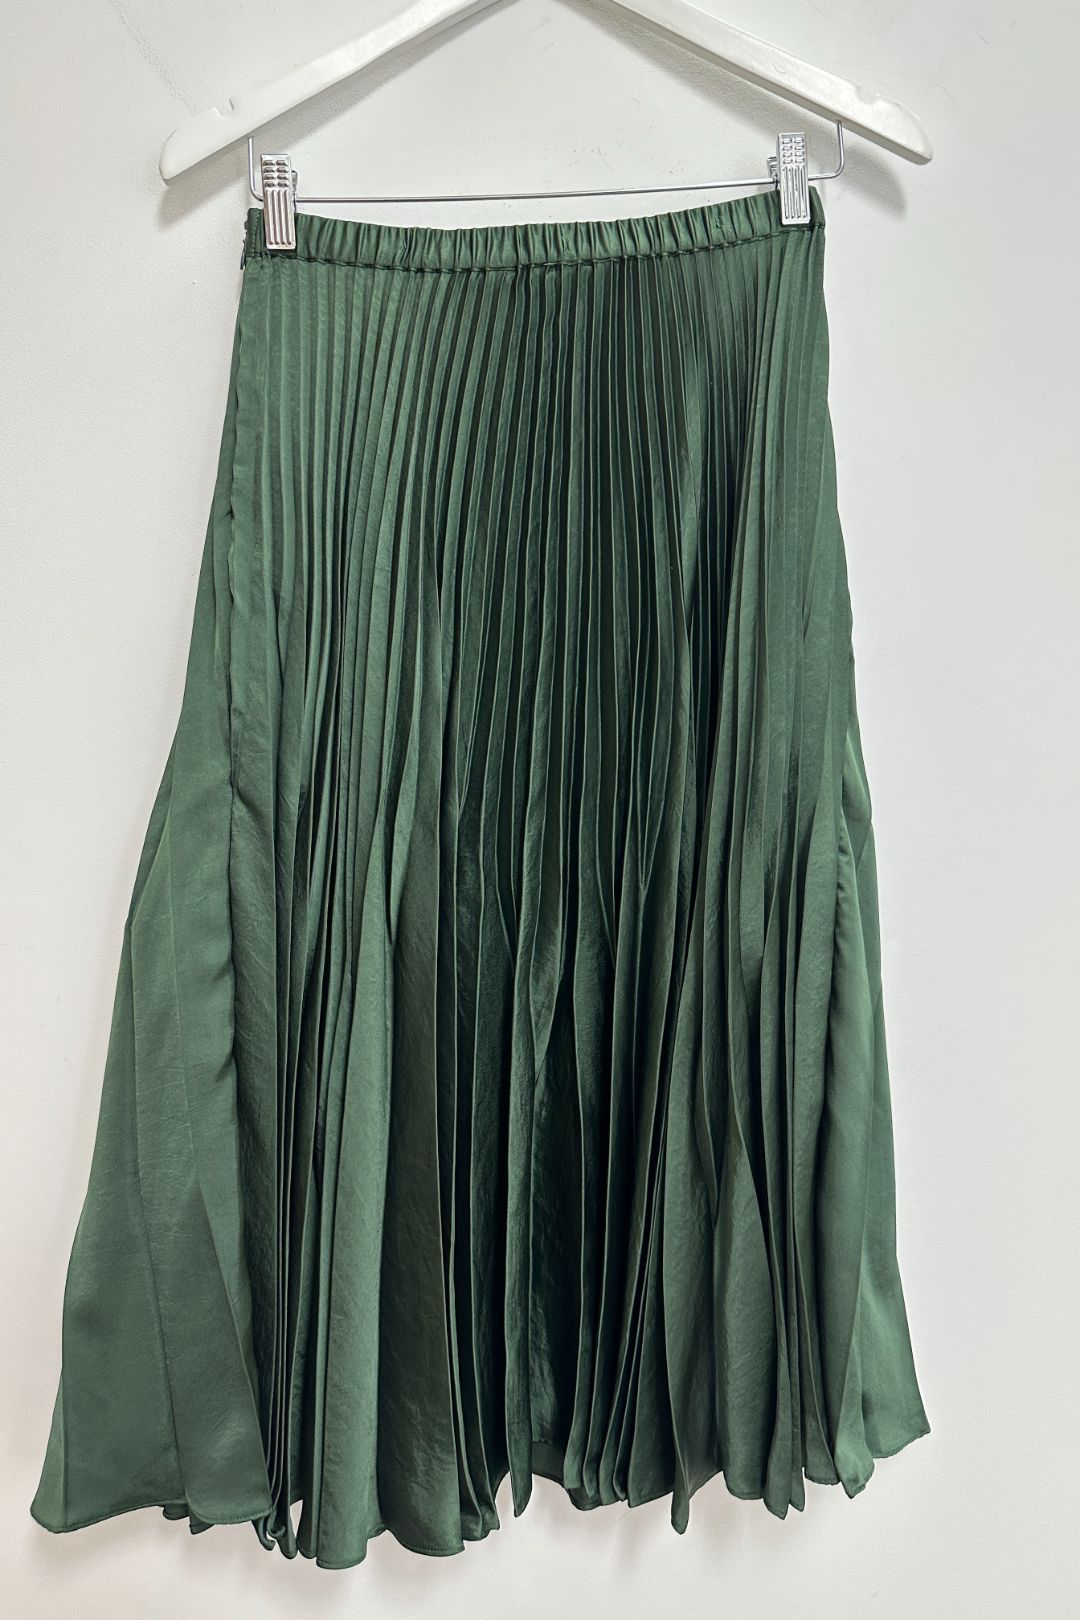 Country Road - Pleated Midi Skirt in Green